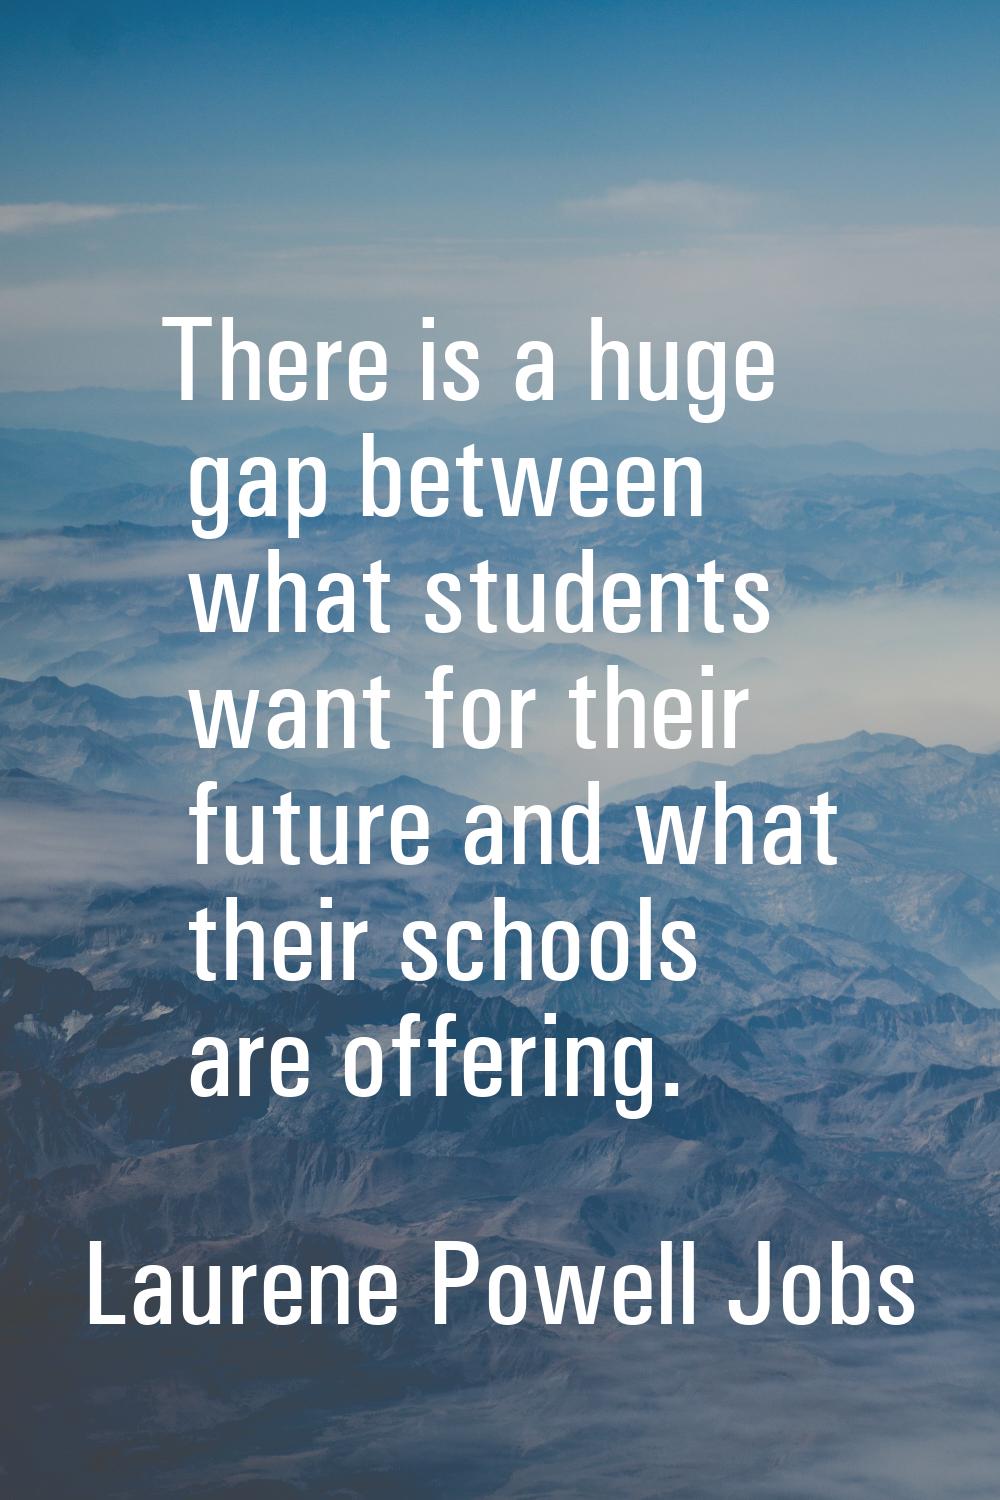 There is a huge gap between what students want for their future and what their schools are offering